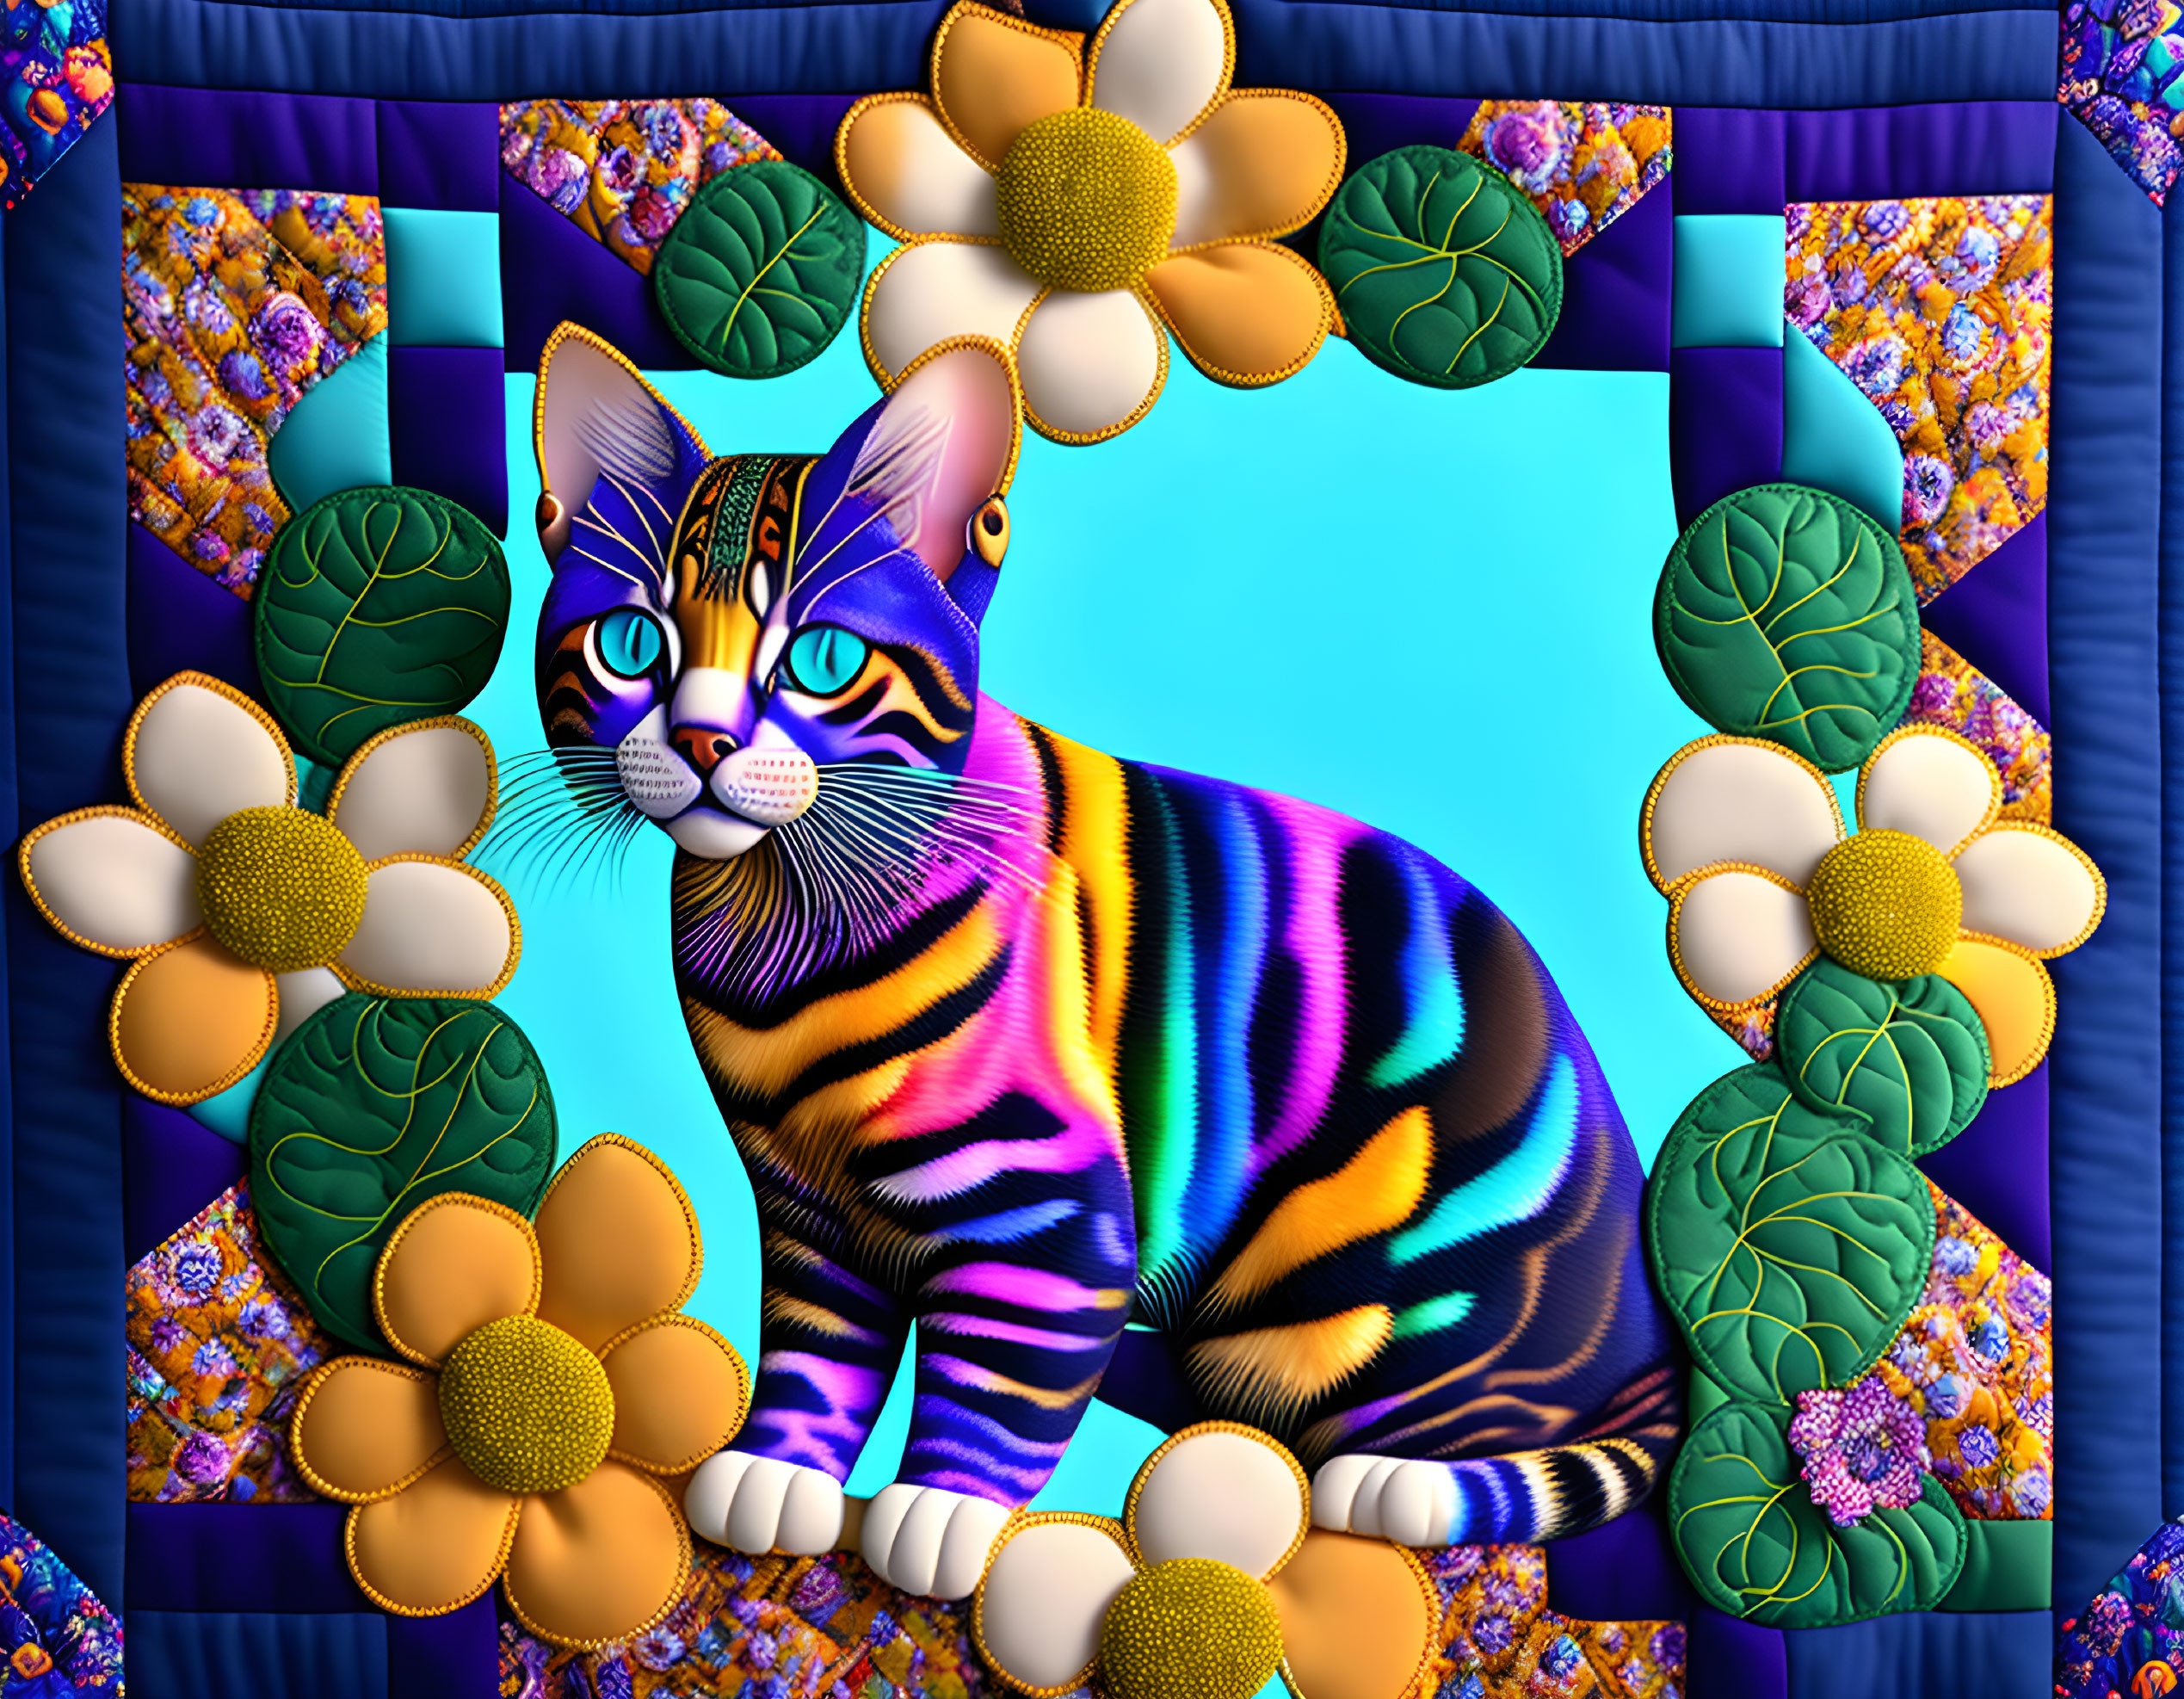 Colorful Striped Cat Art with Psychedelic Patterns and Floral Surroundings